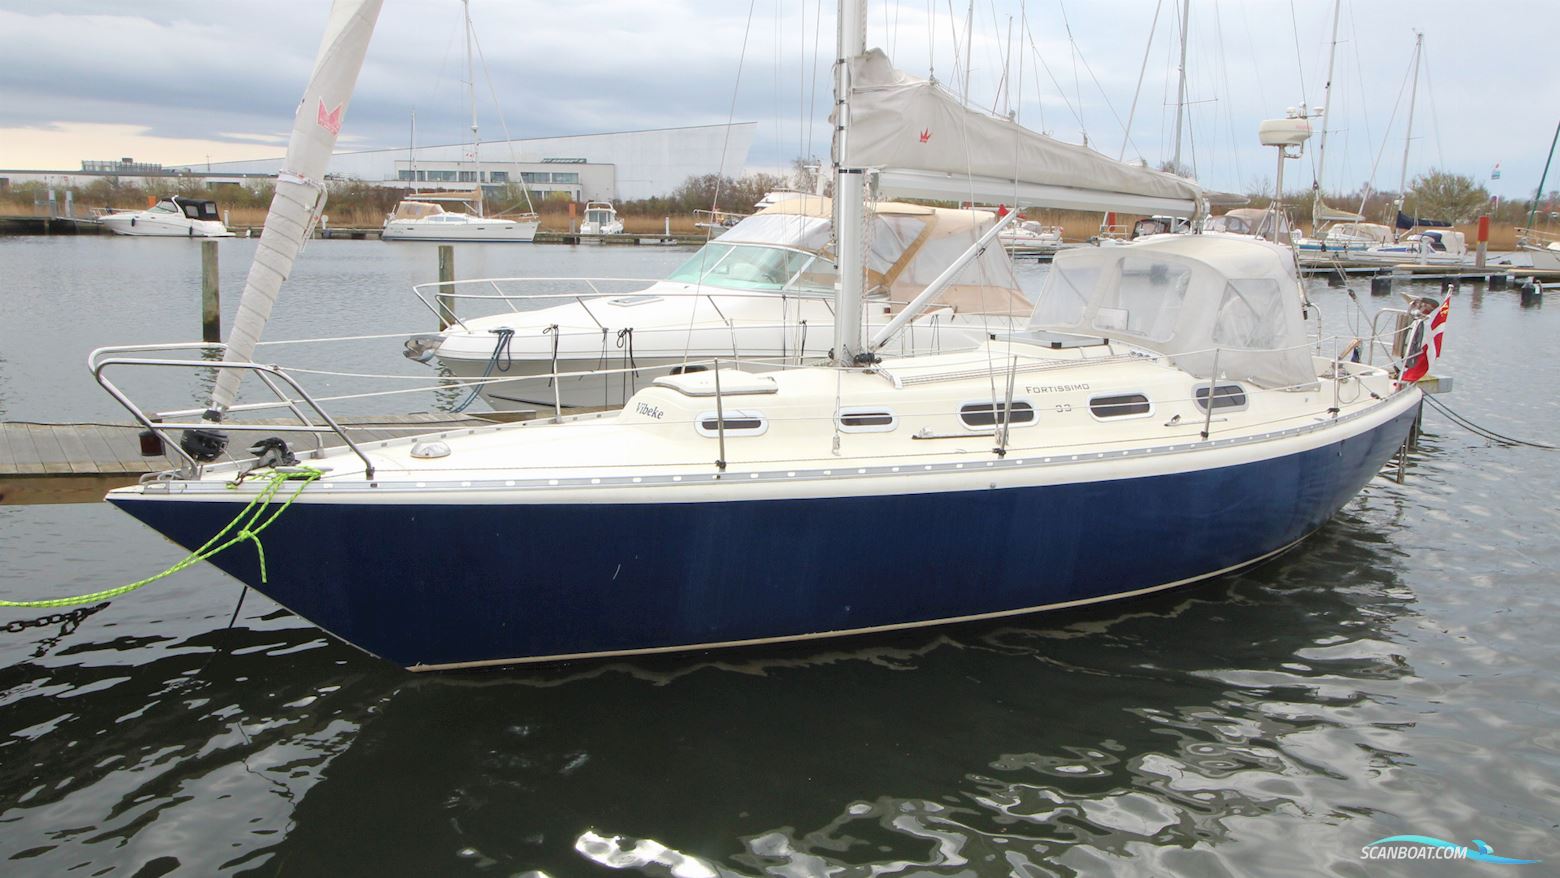 Marieholm Fortissimo 33 Sailing boat 1985, with Volvo Penta engine, Denmark